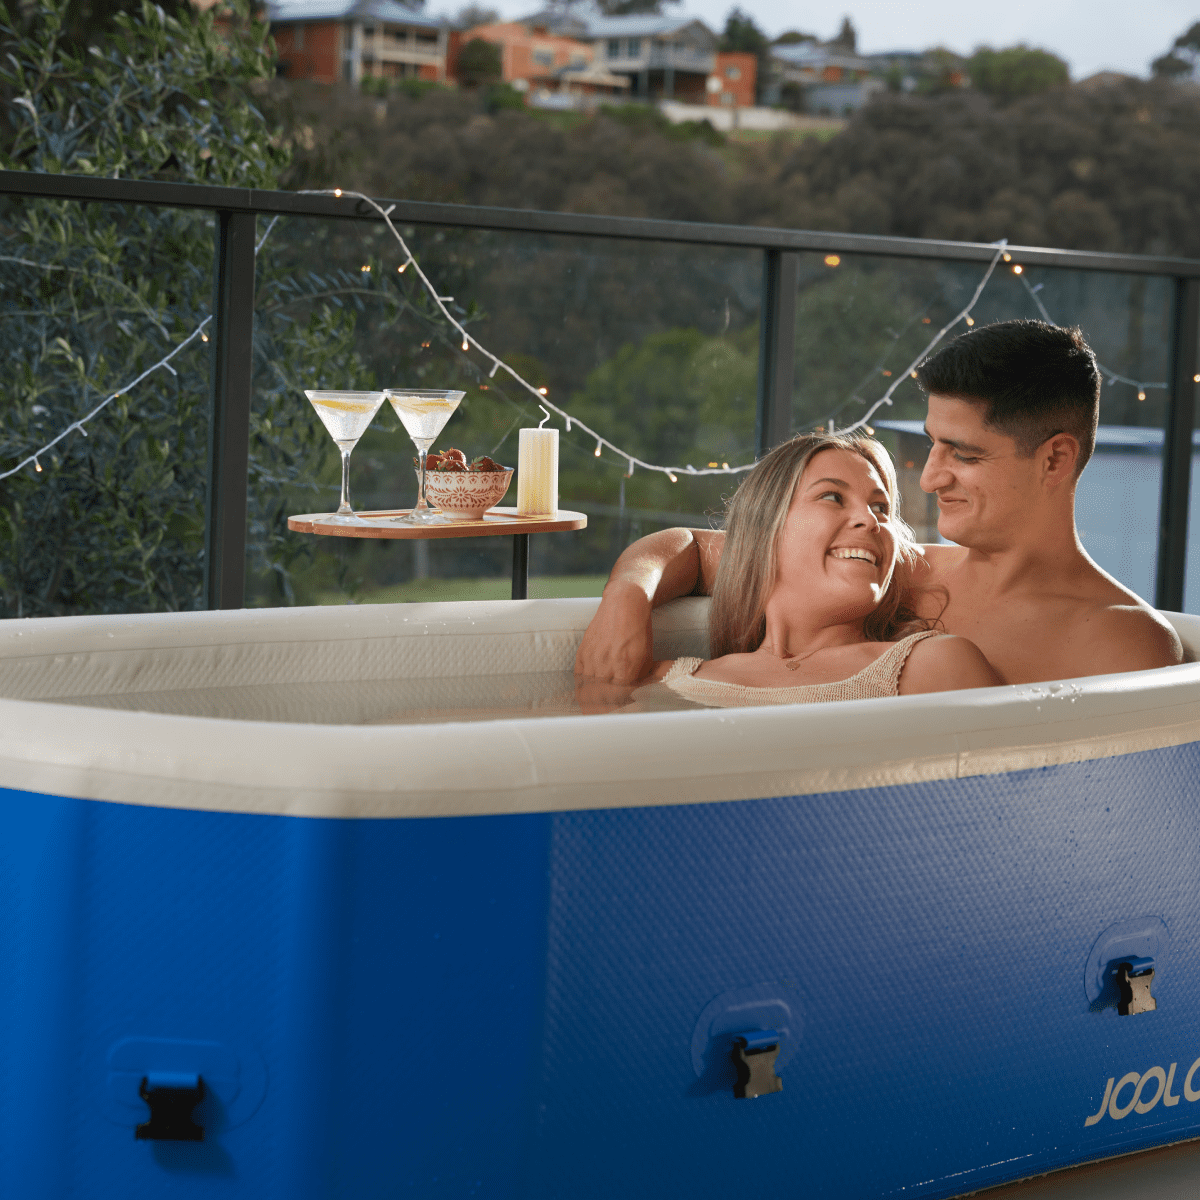 A man and woman sitting in an inflatable hot tub with a scenic background